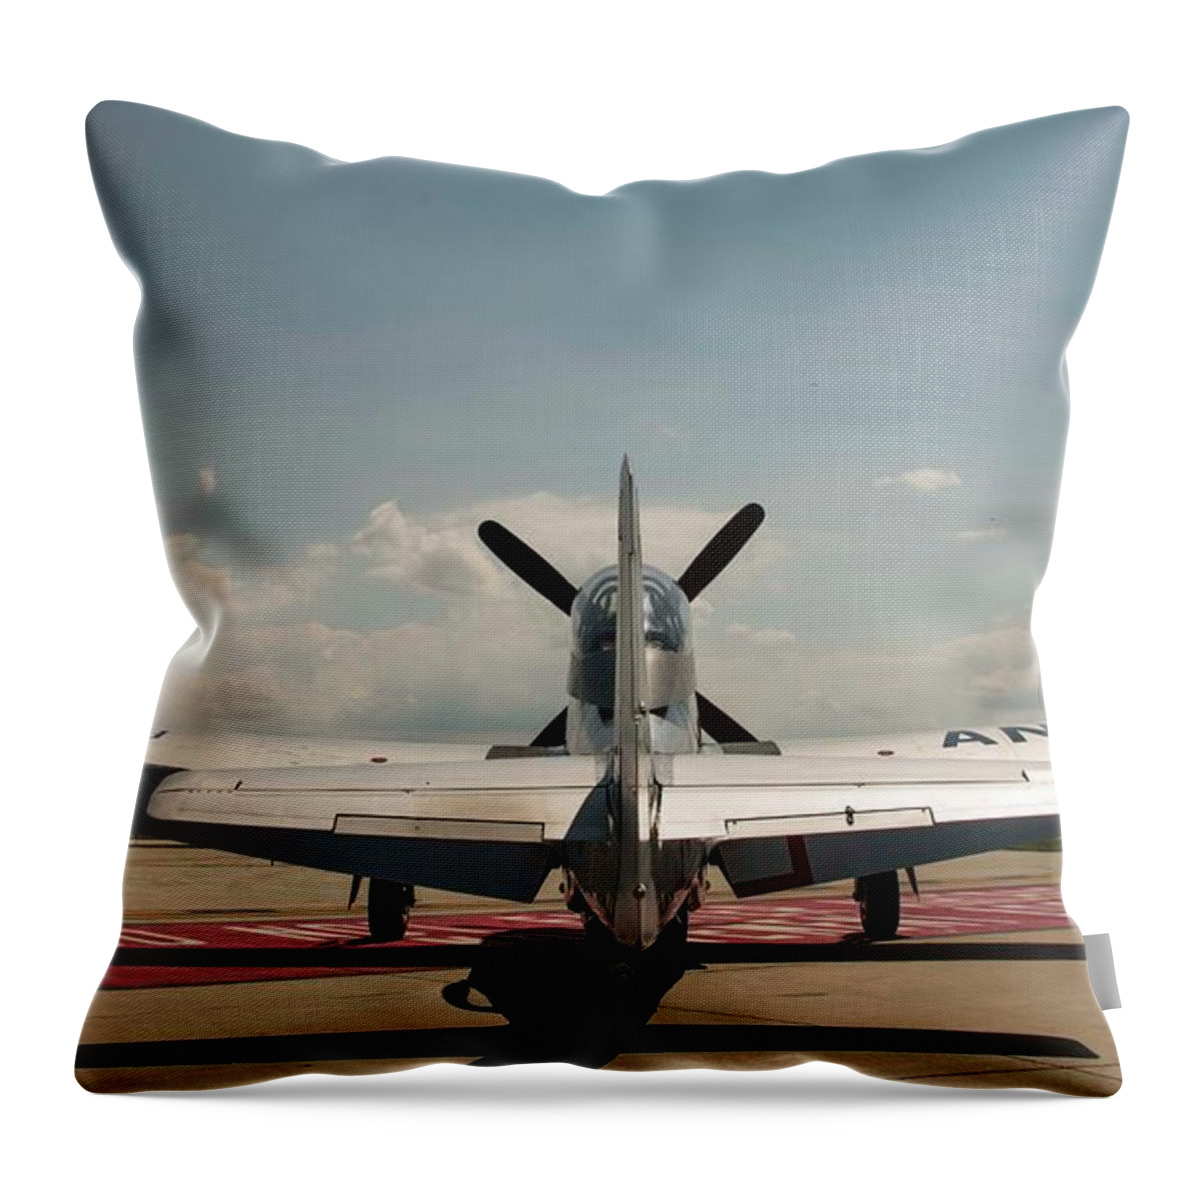 Mustang Throw Pillow featuring the photograph P-51 Mustang by David Bearden